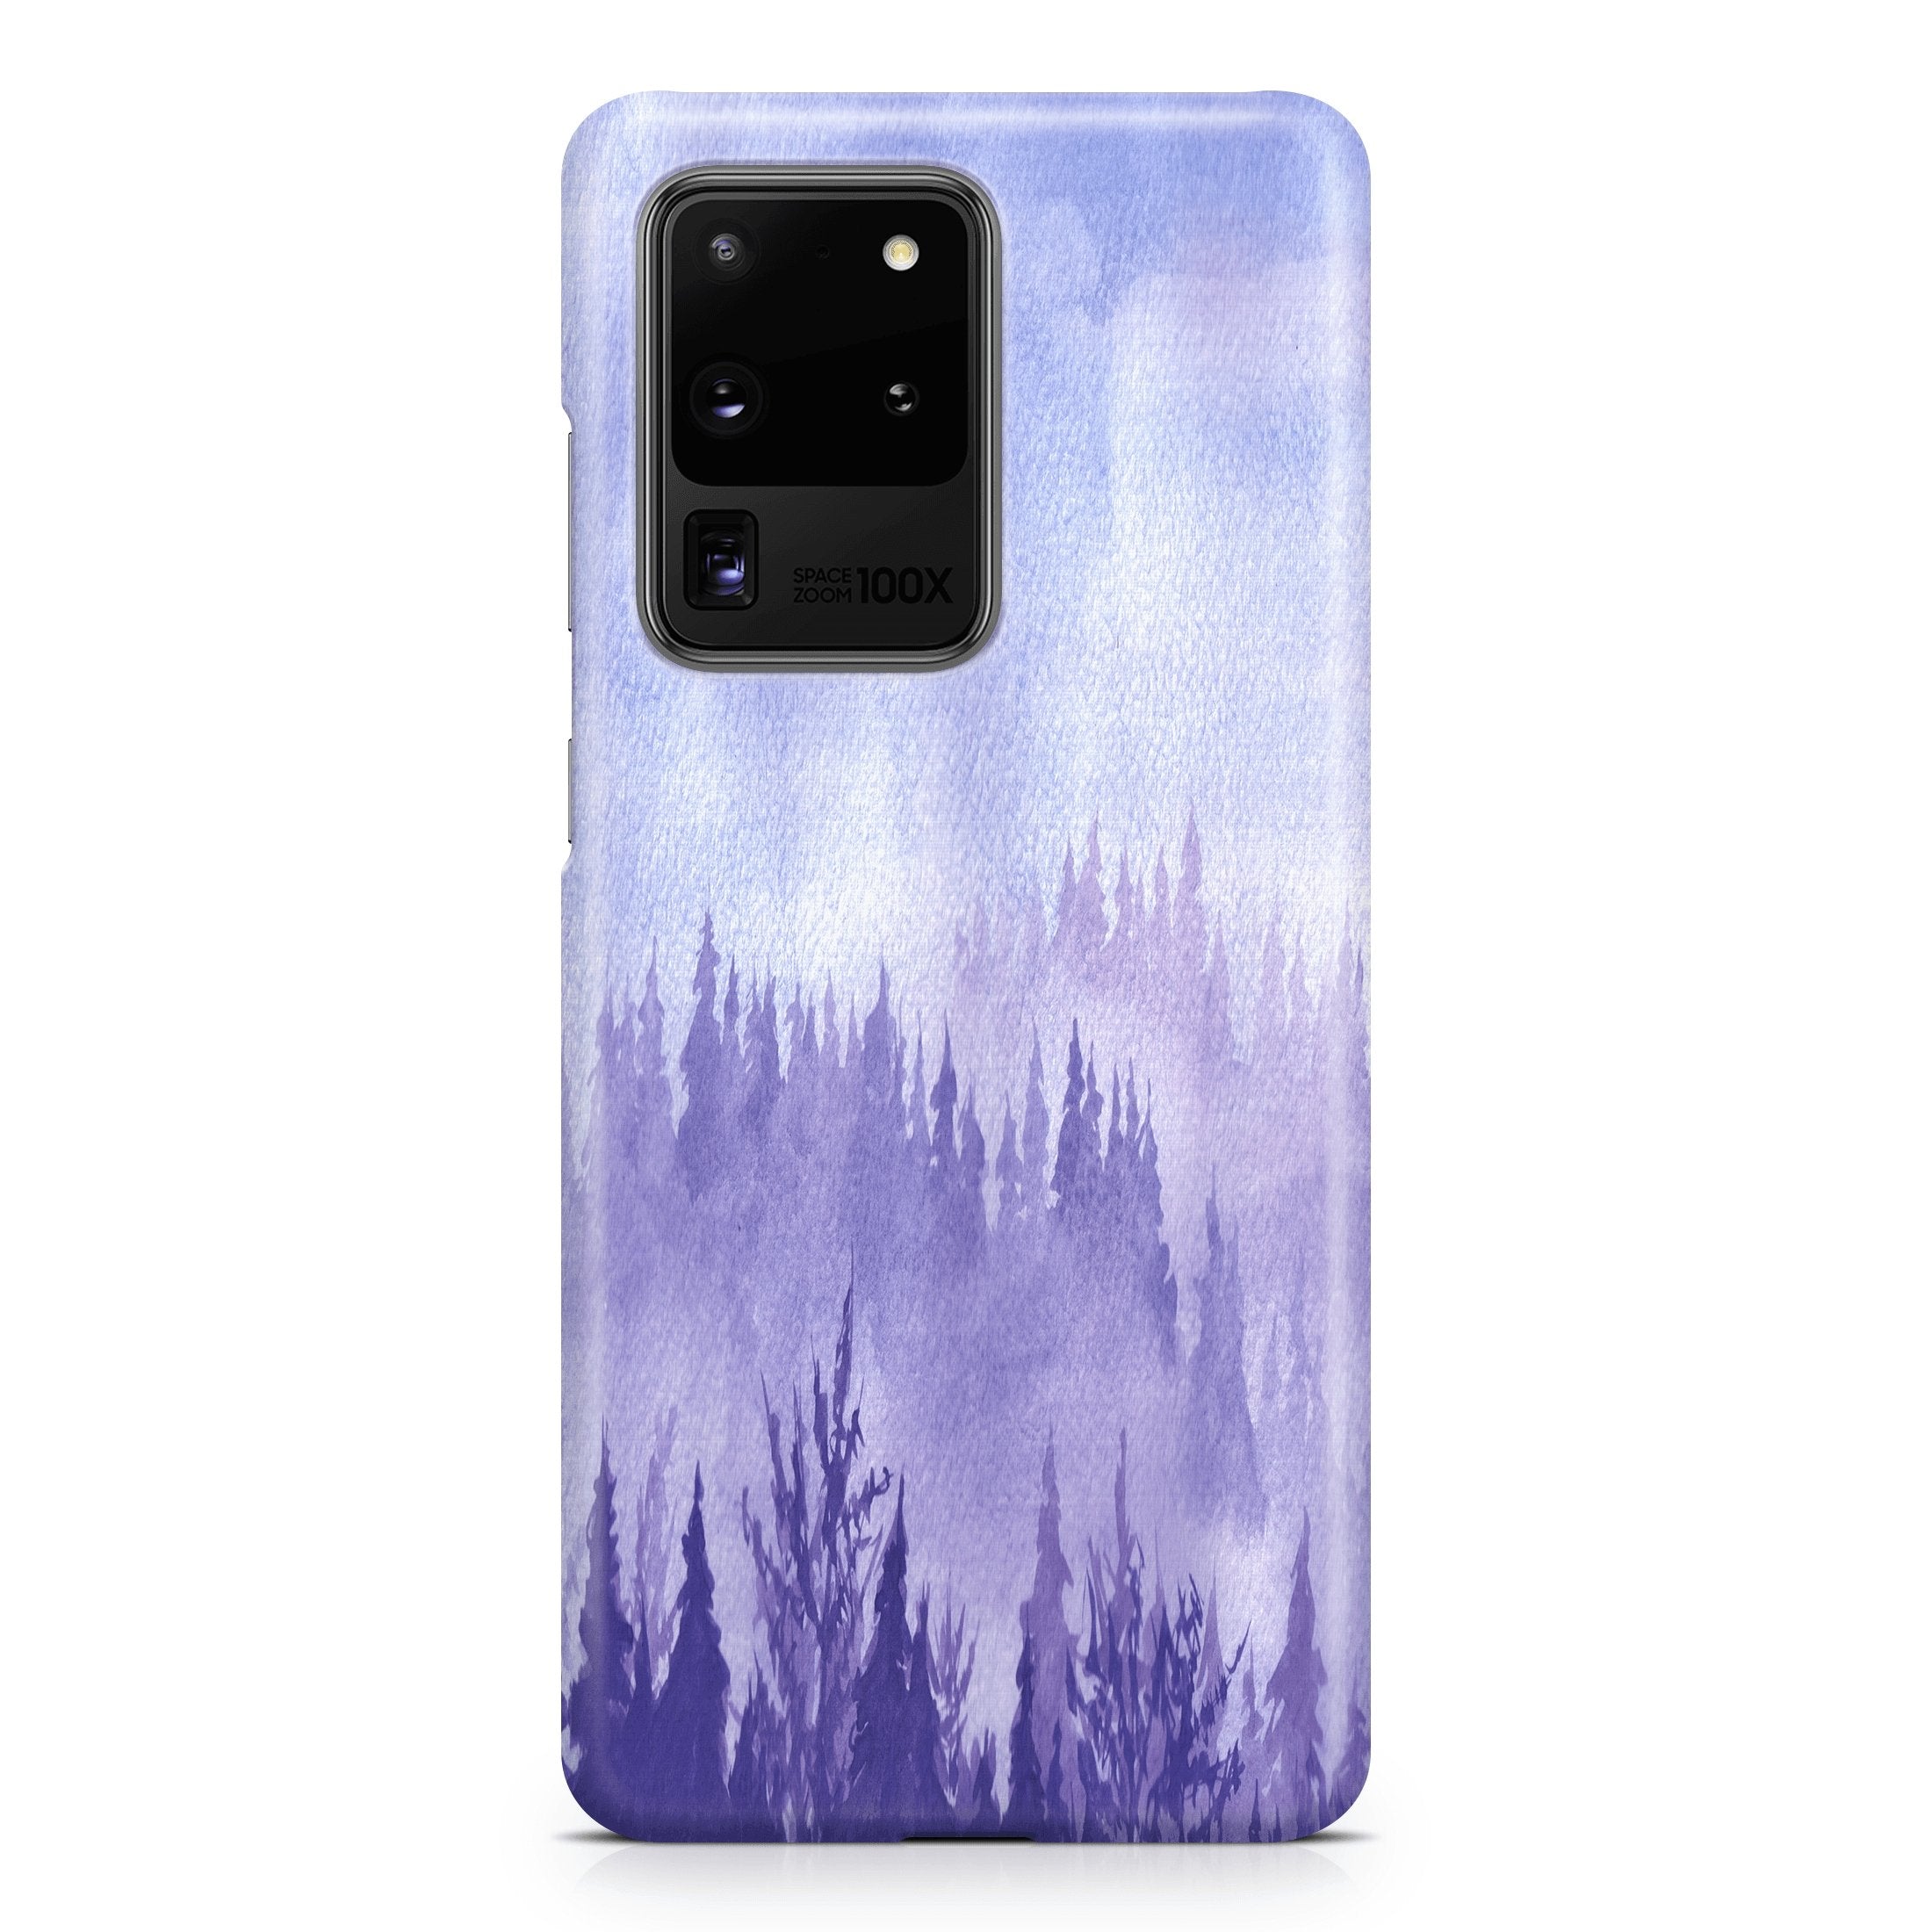 Purple Hills - Samsung phone case designs by CaseSwagger